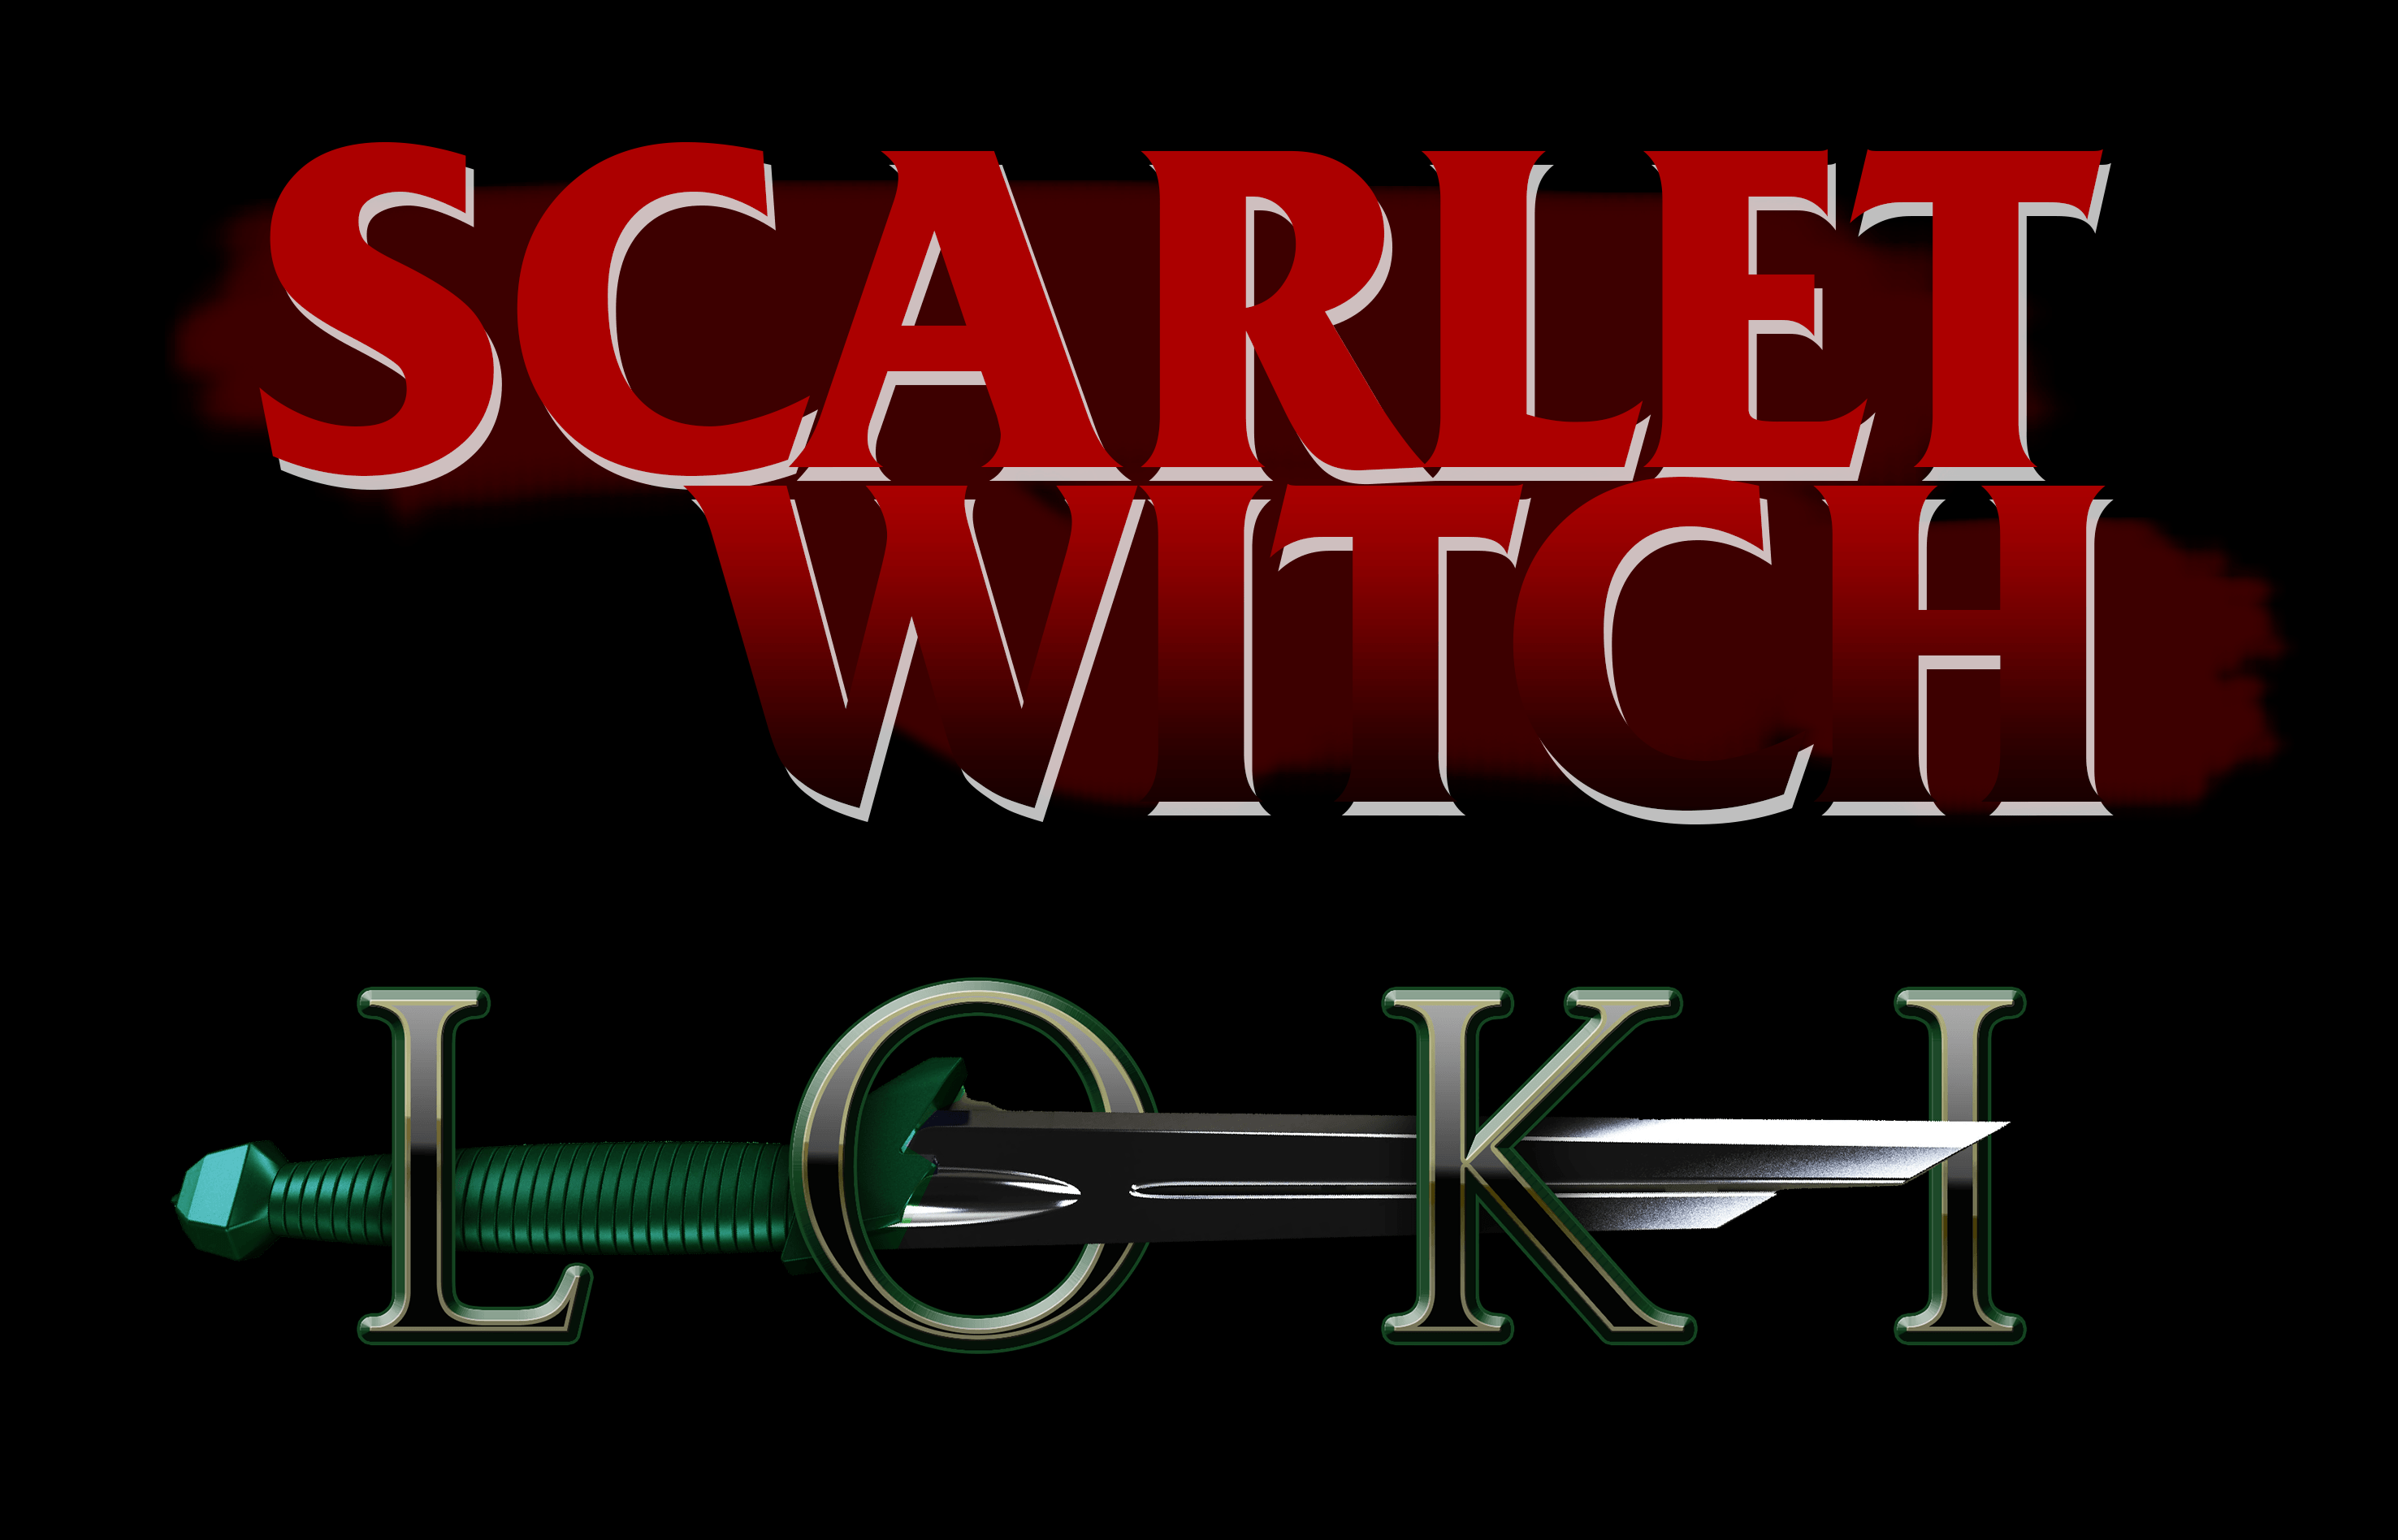 Loki Logo - Made up some logos for the Loki and Scarlet Witch shows!